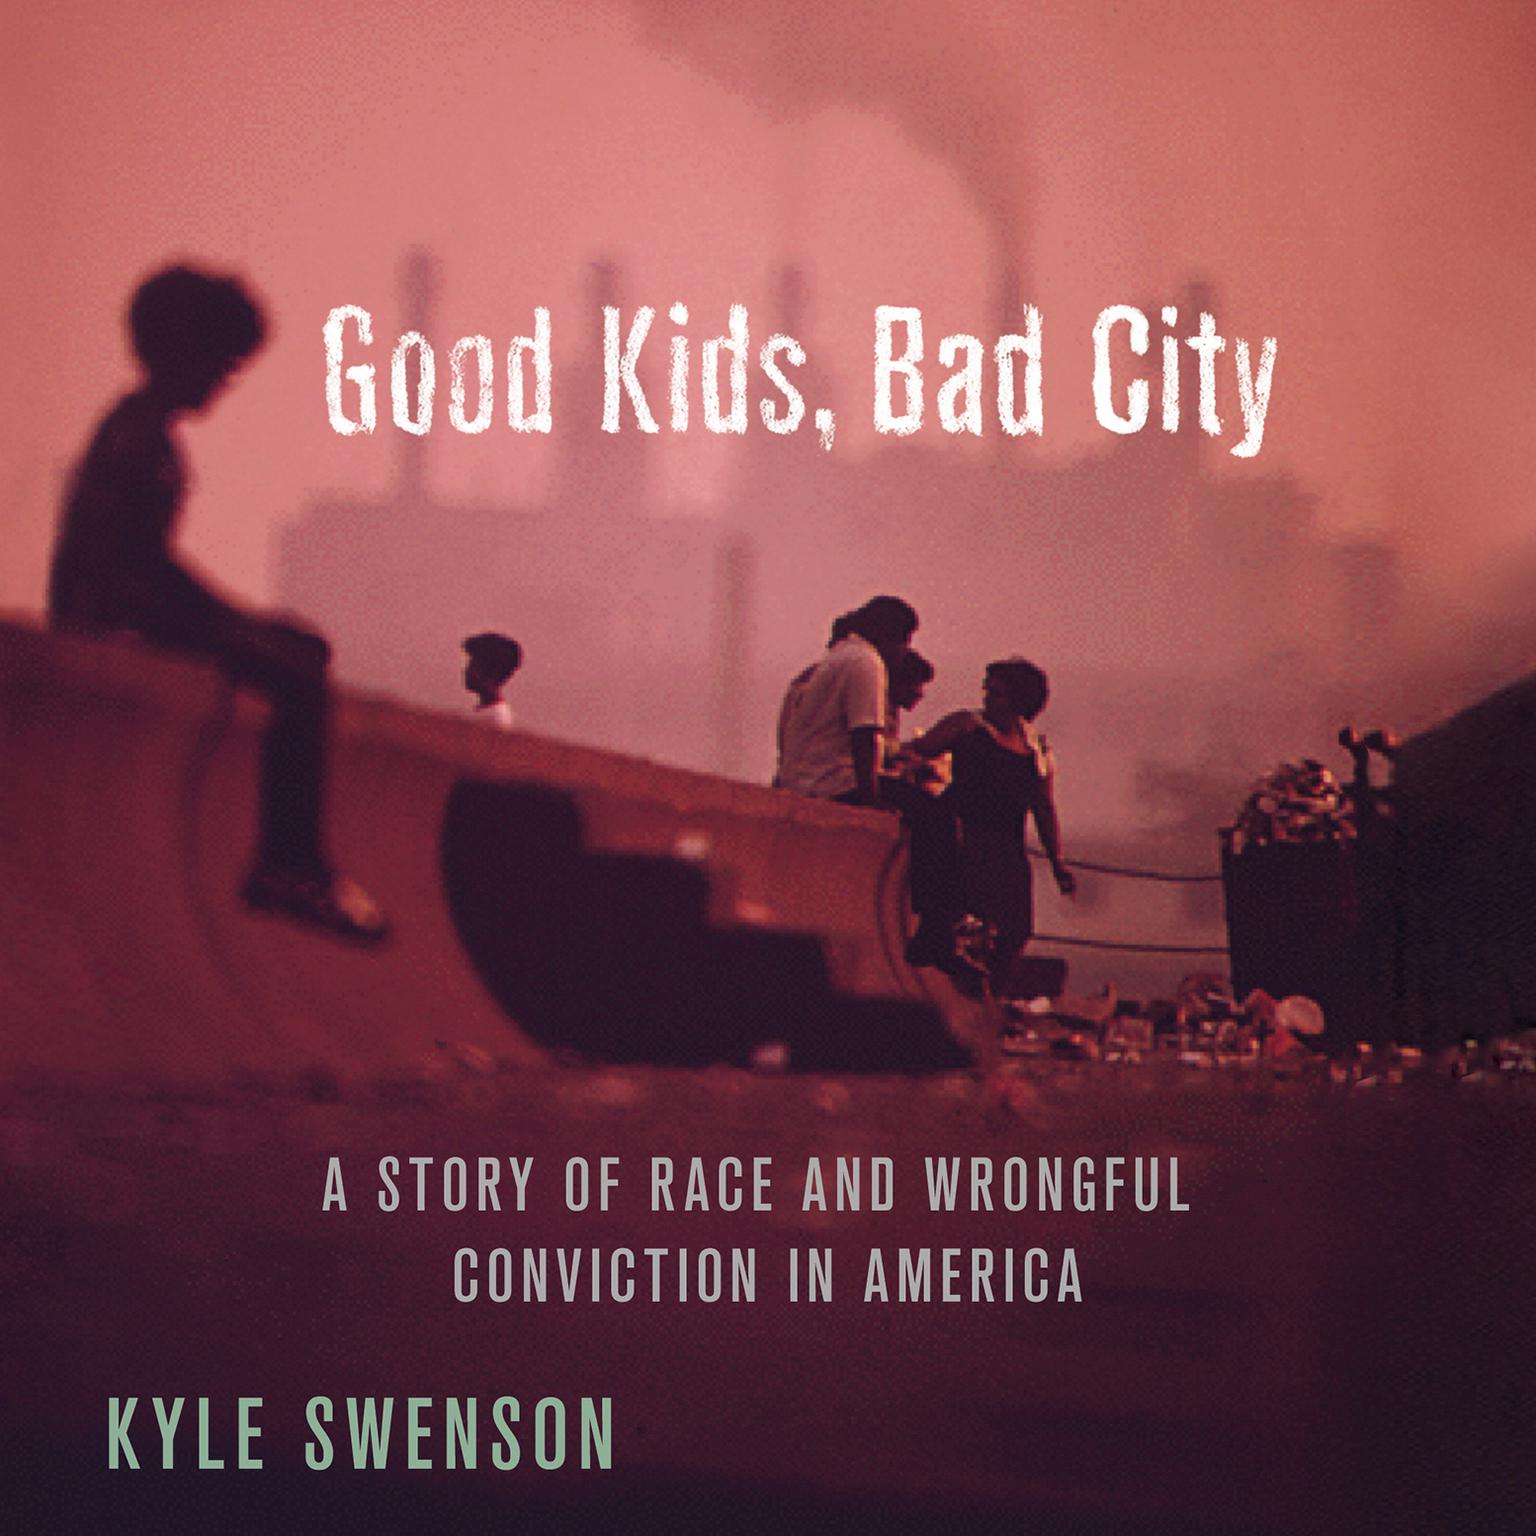 Good Kids, Bad City: A Story of Race and Wrongful Conviction in America Audiobook, by Kyle Swenson